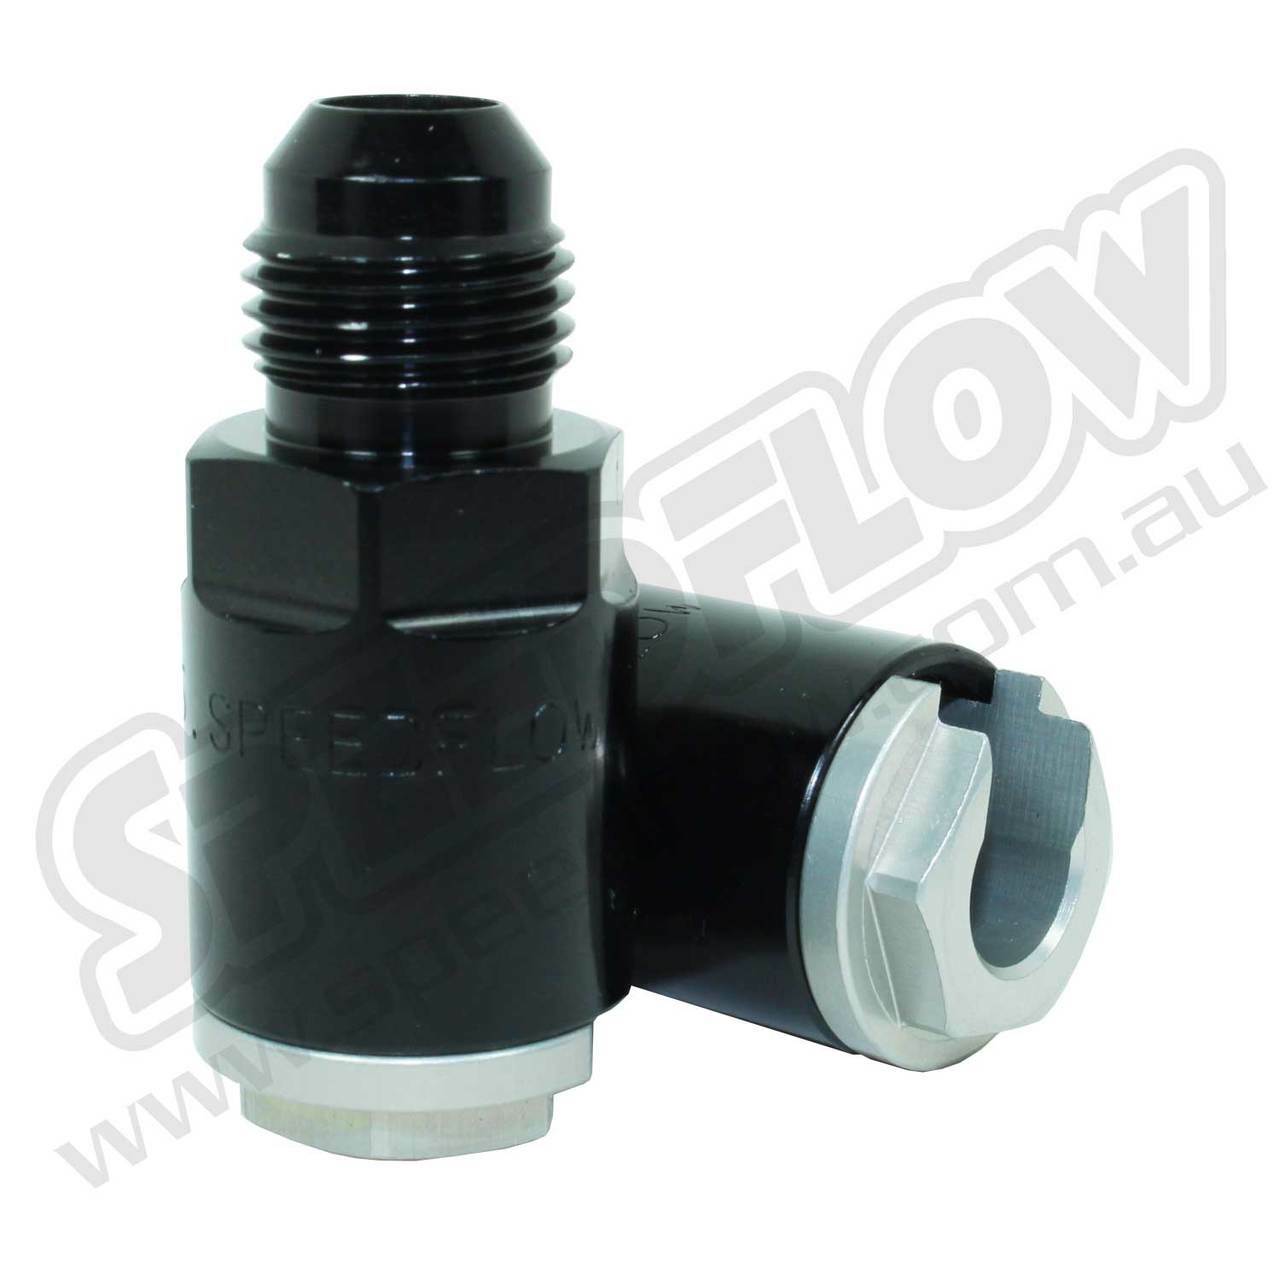 715-06-05-BLK -6 male to 5/16" EFI tube adapter